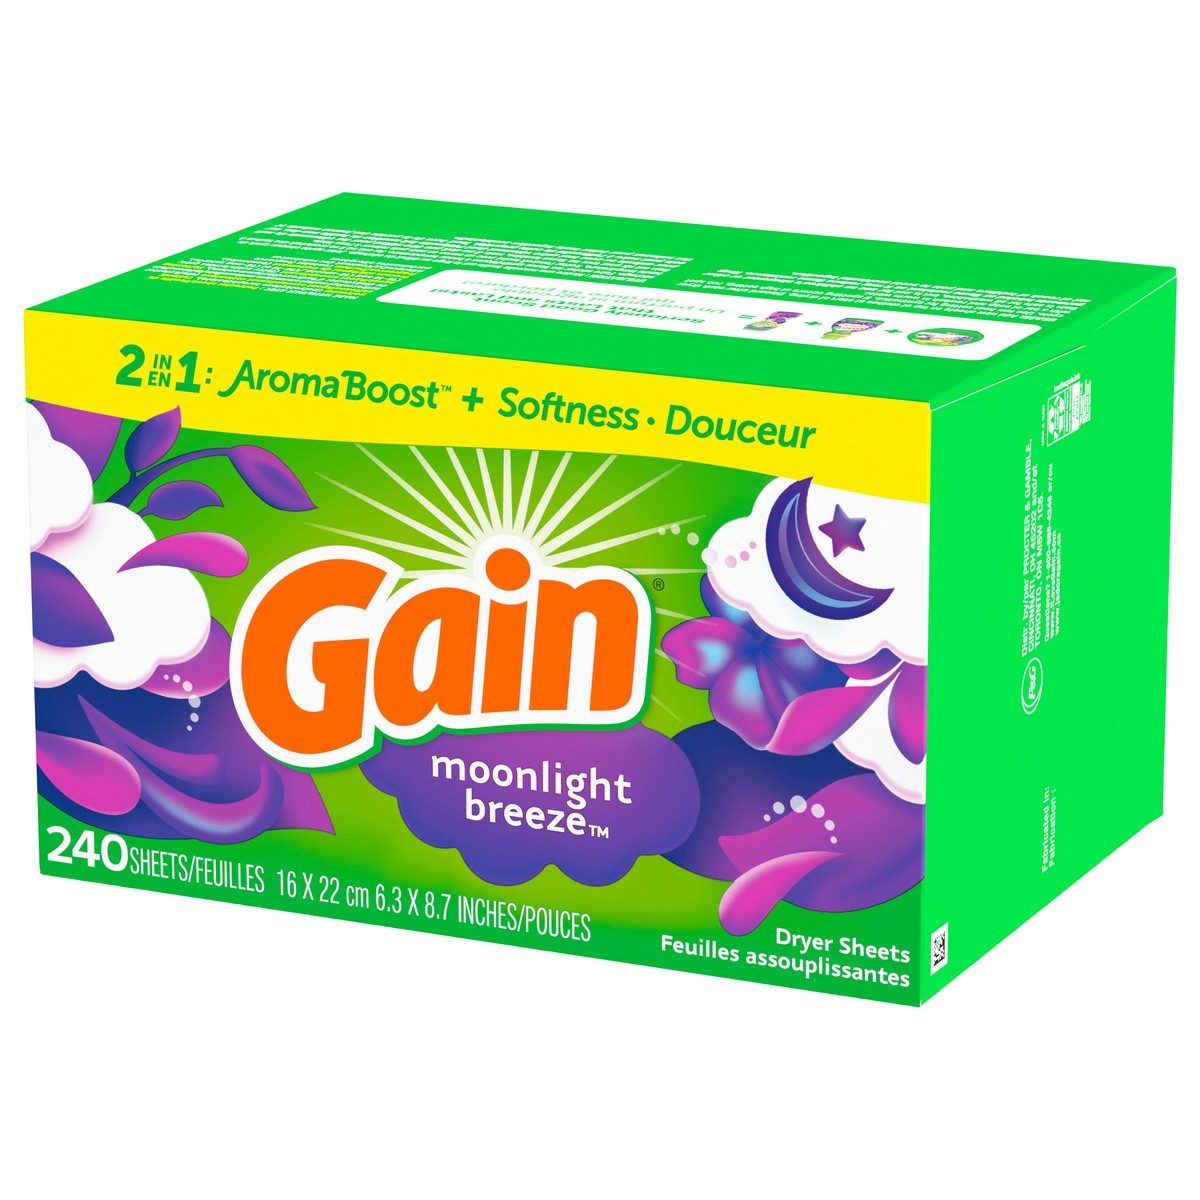 slide 9 of 12, Gain dryer sheets, 240 Count, Moonlight Breeze Scent Laundry Fabric Softener Sheets with 2-in-1 Aromaboost Plus Softness, 240 ct